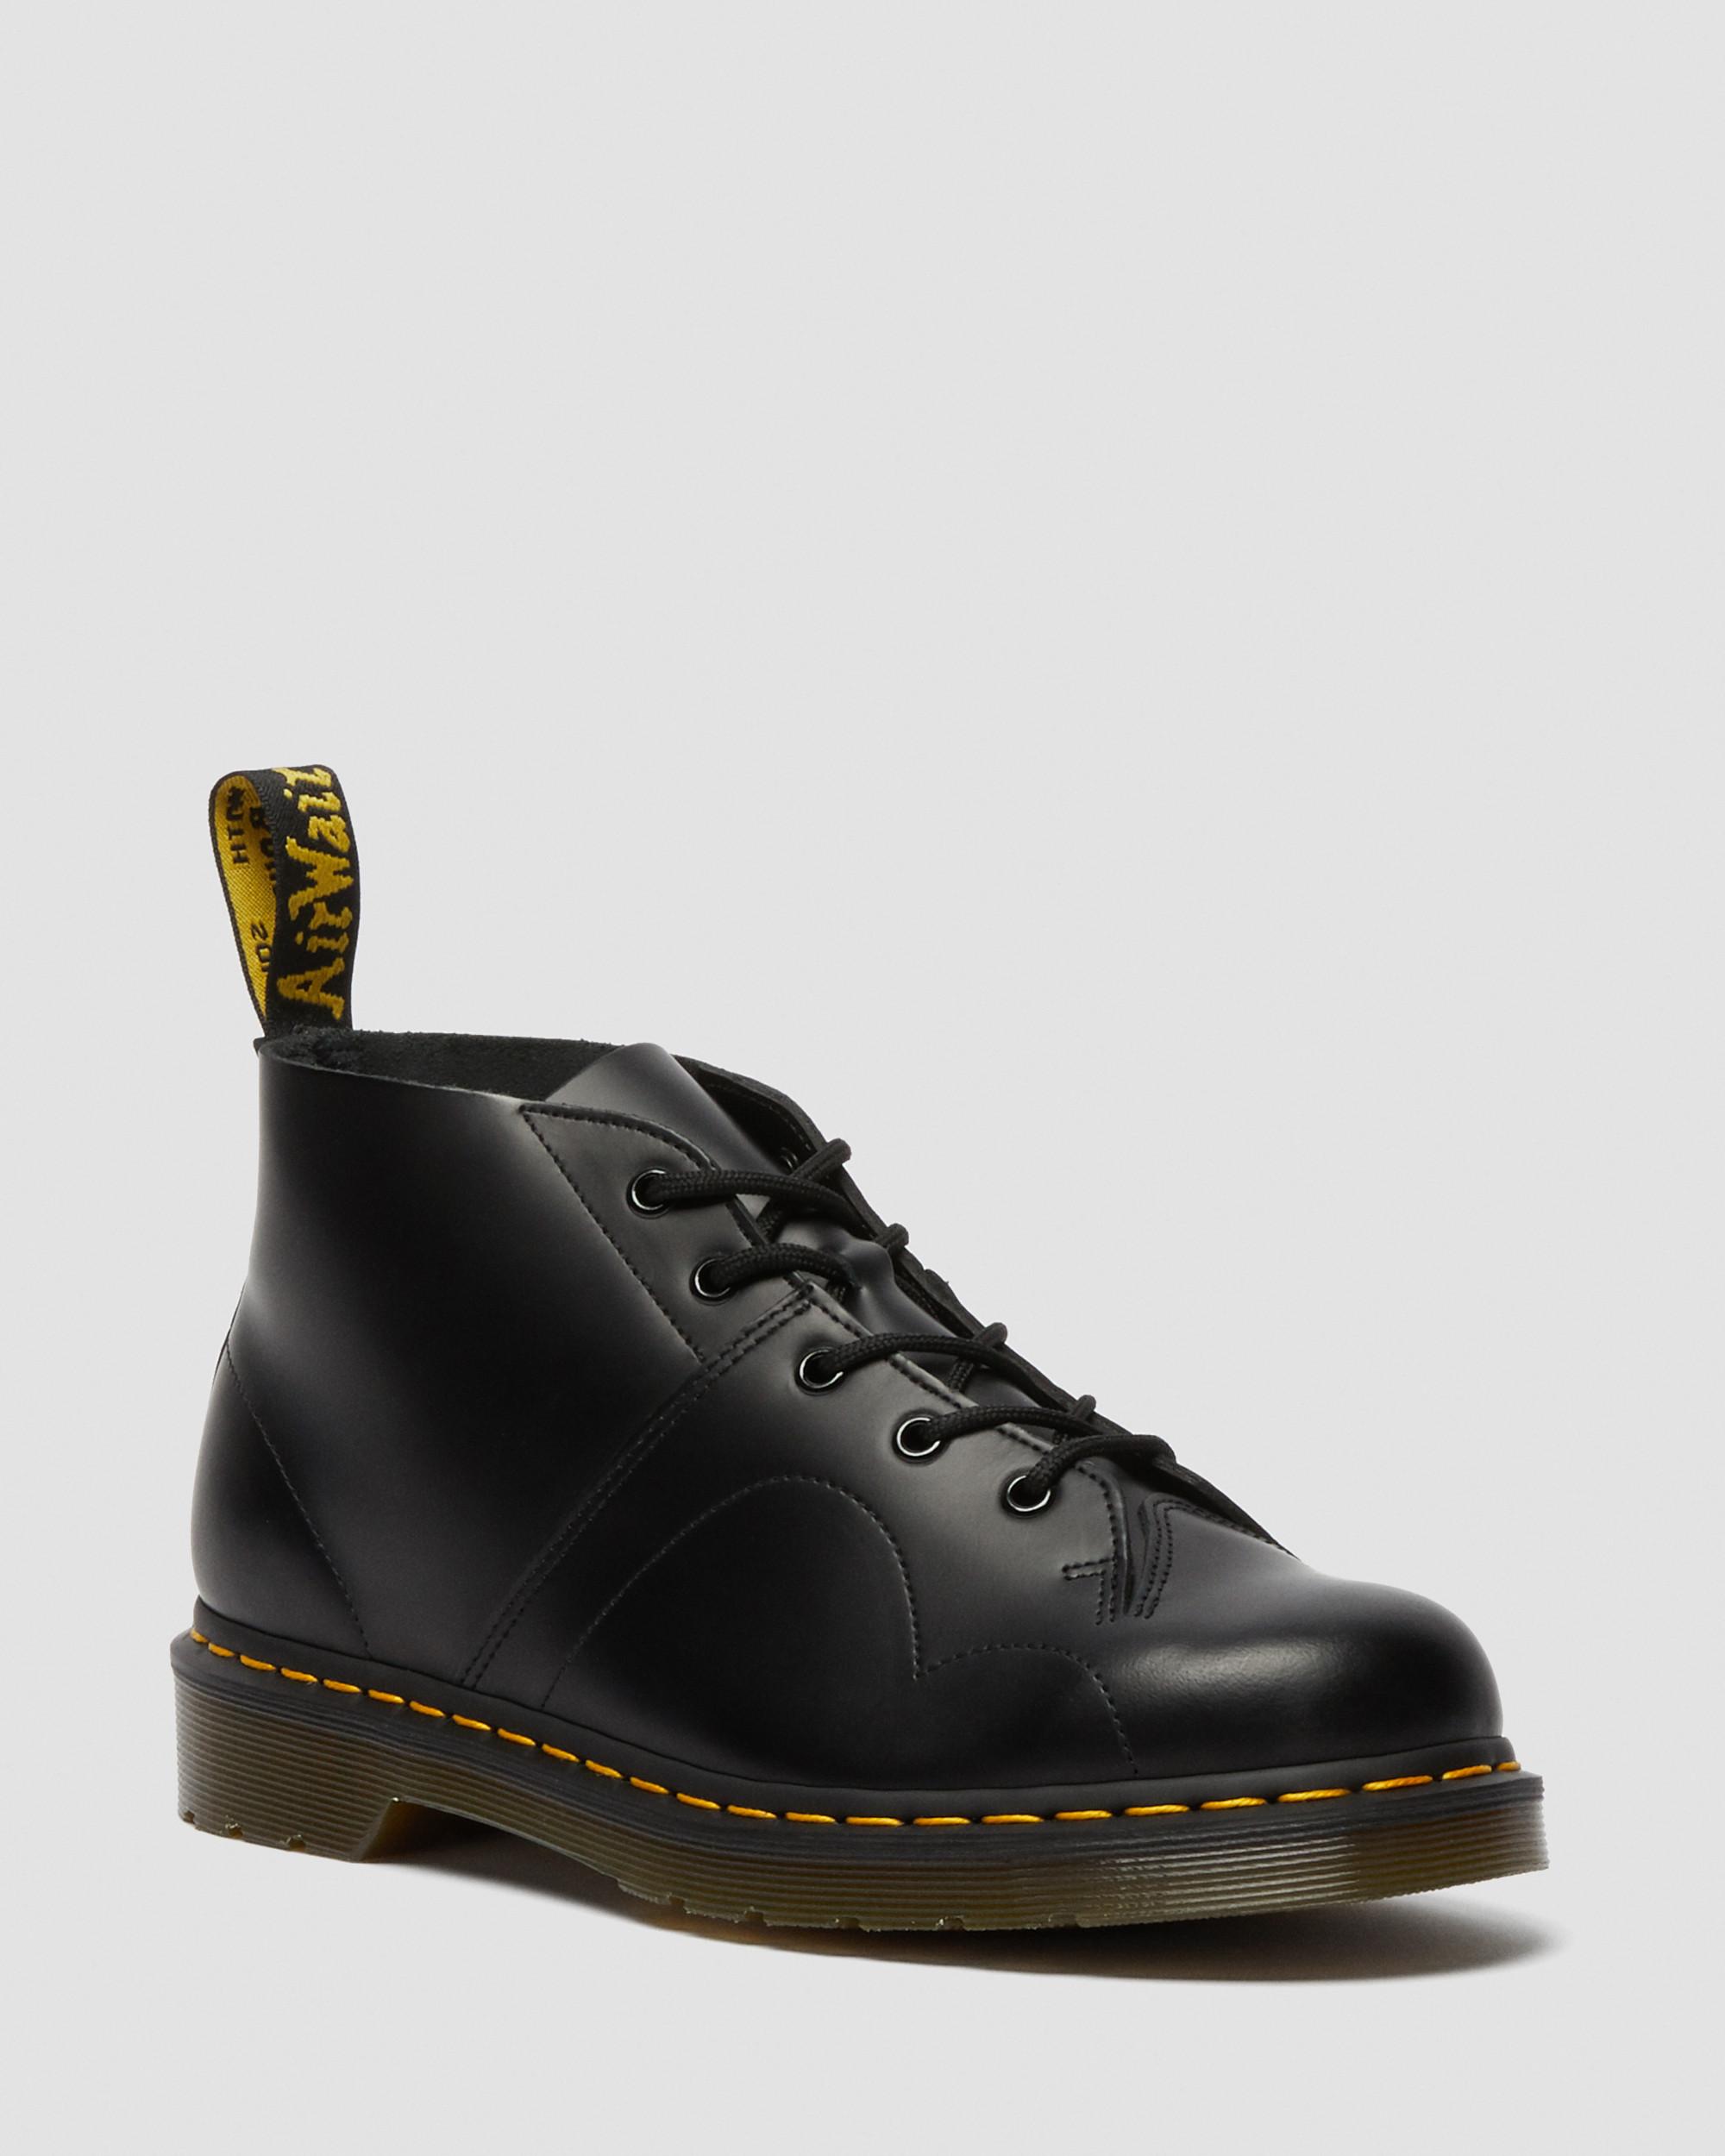 CHURCH SMOOTH LEATHER MONKEY BOOTS in Black